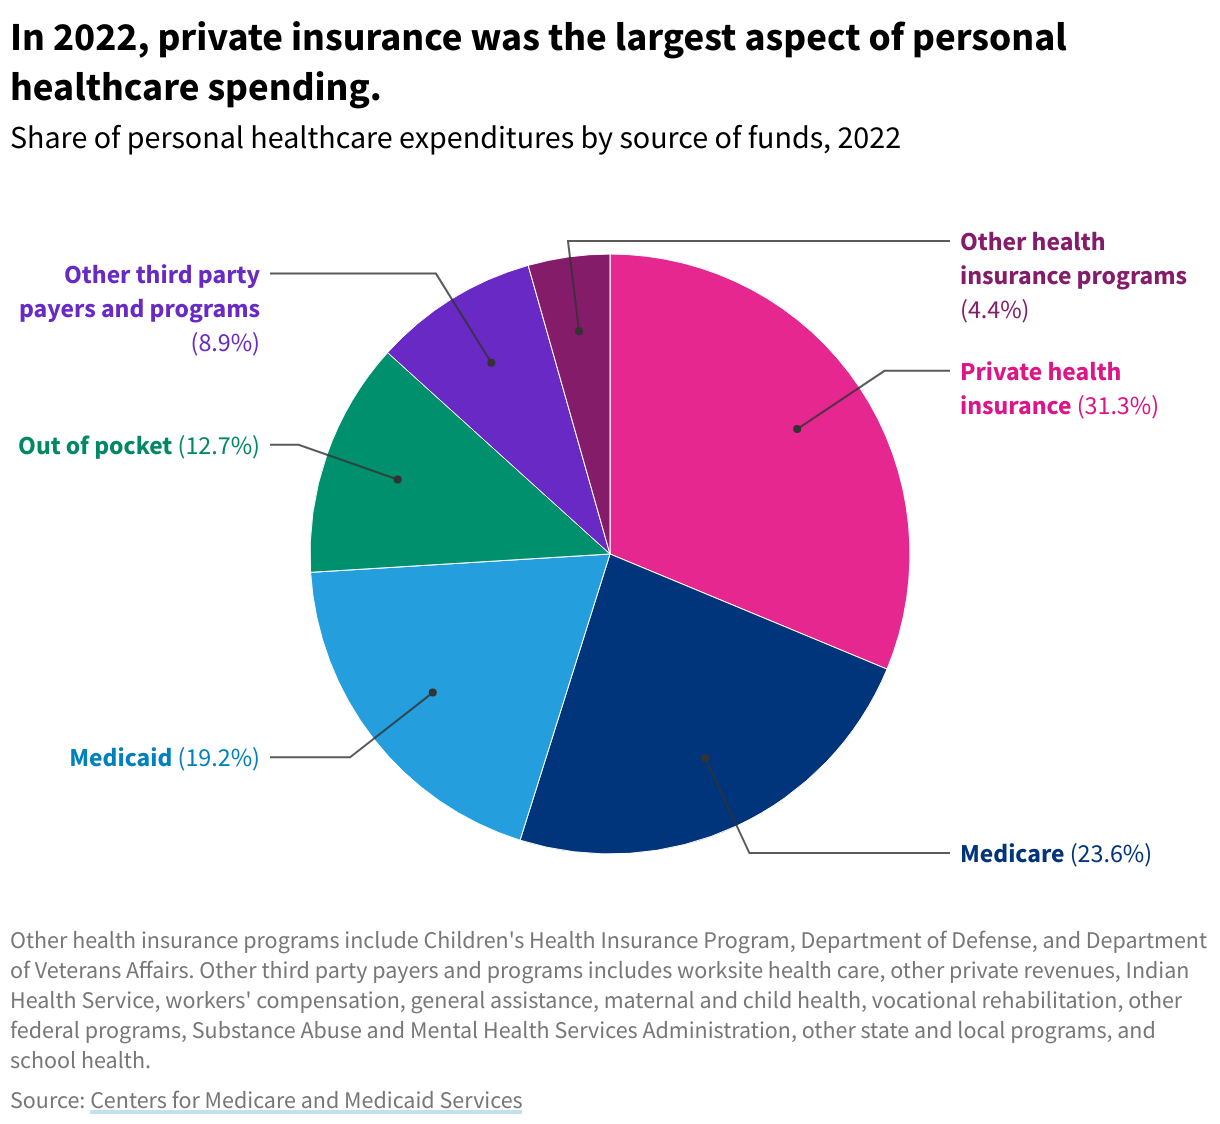 Pie chart showing the breakdown of personal healthcare expenditures in 2022.